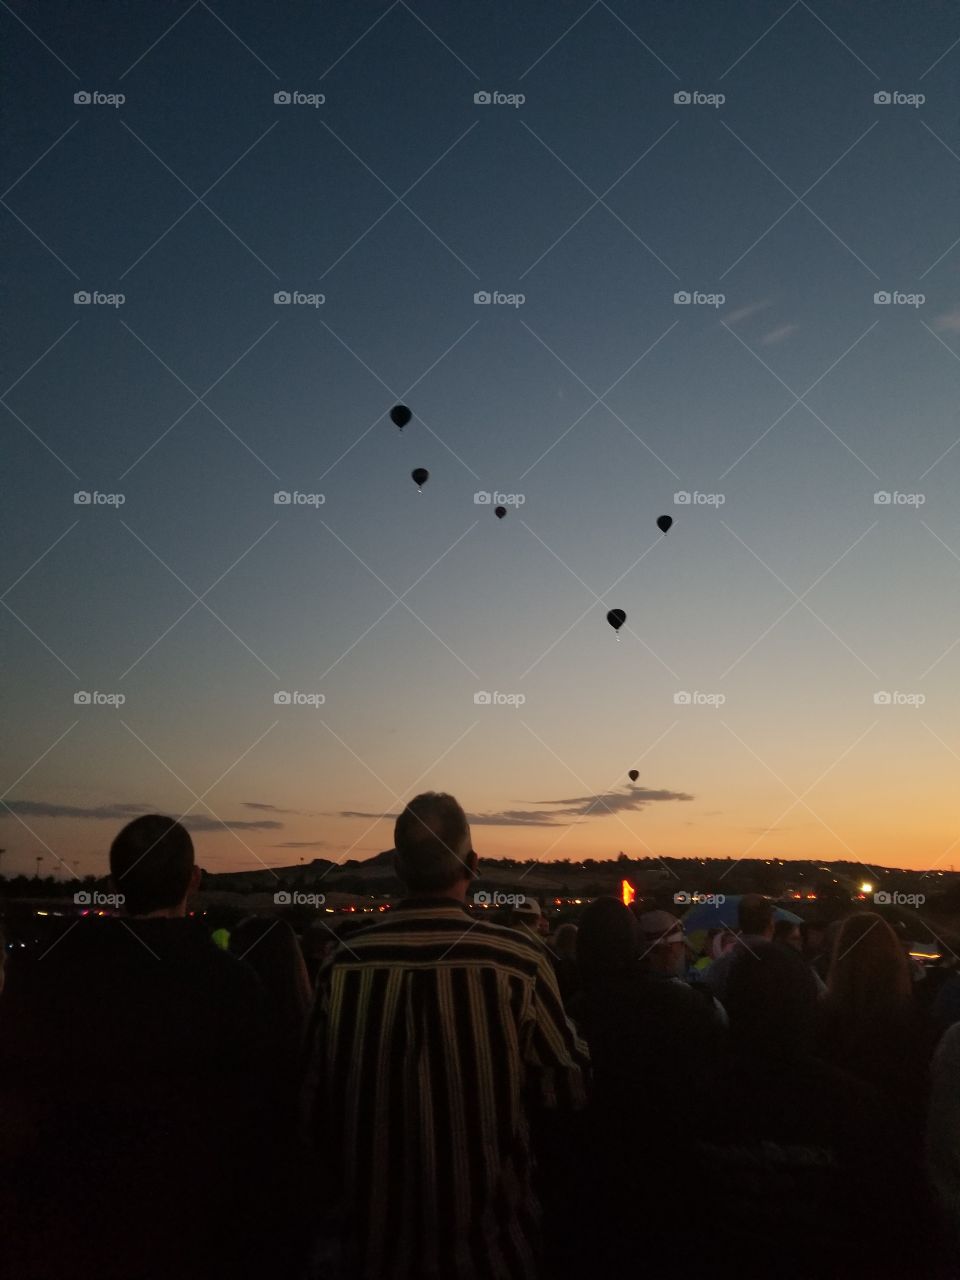 Hot air balloon races in Reno, NV while the sun rises